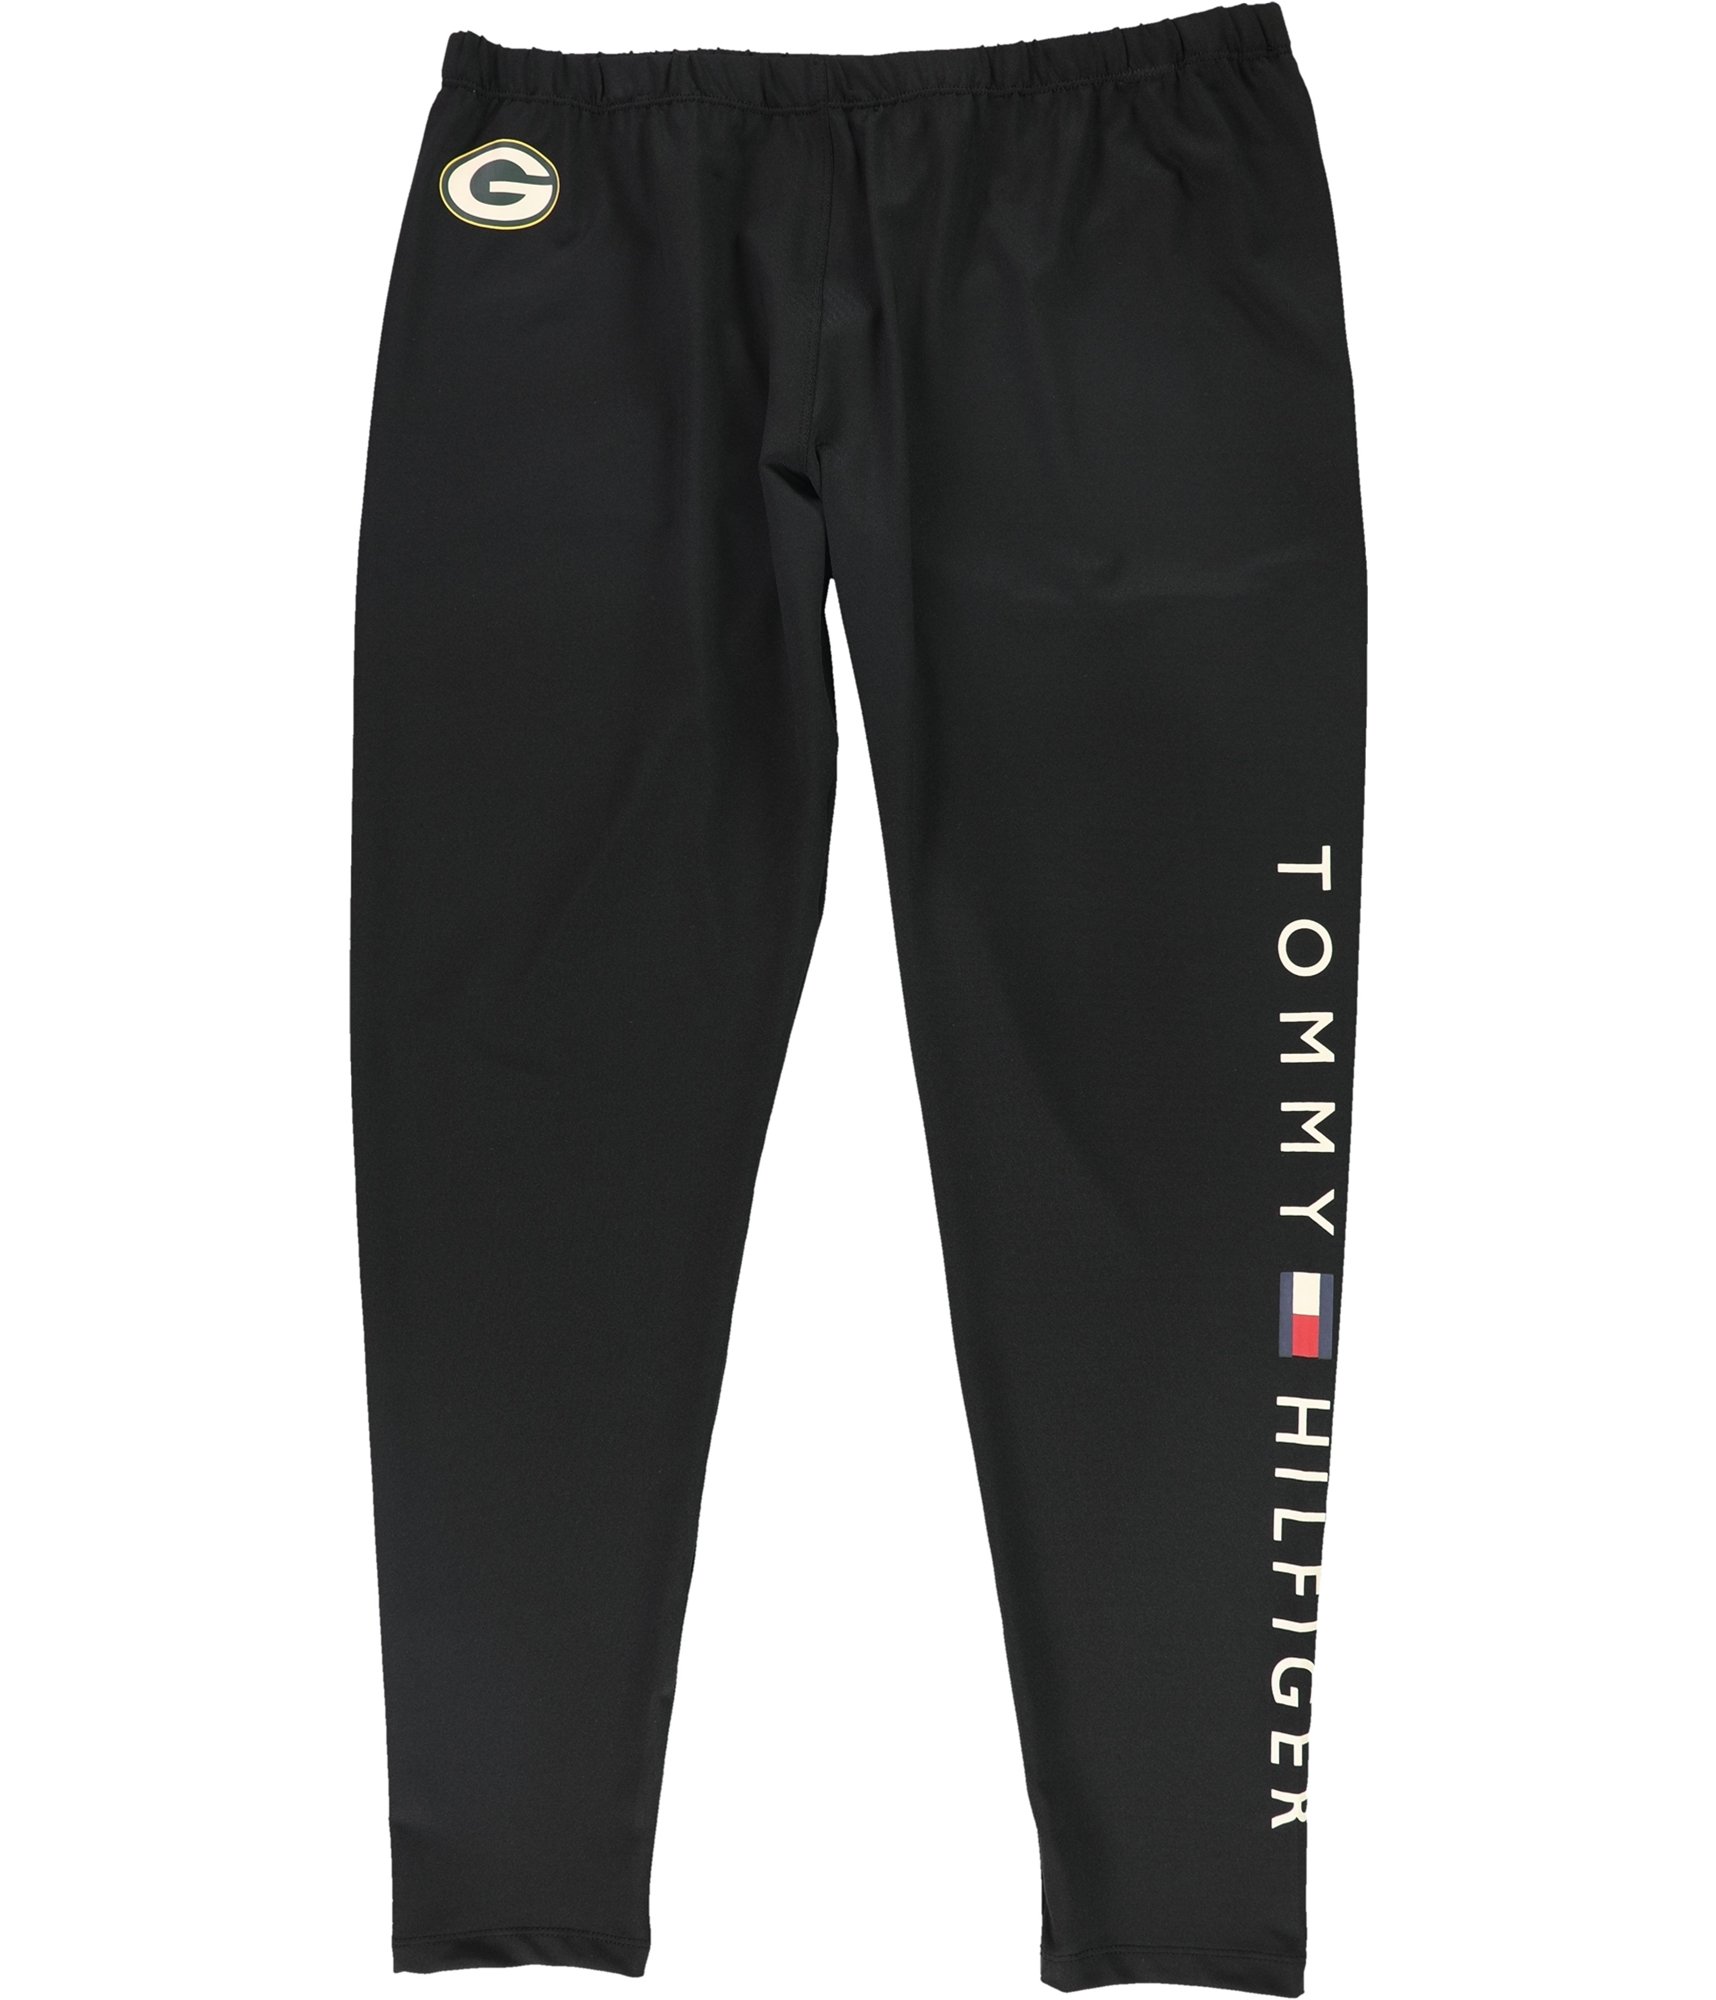 Buy a Dkny Womens Kansas City Chiefs Compression Athletic Pants, TW2